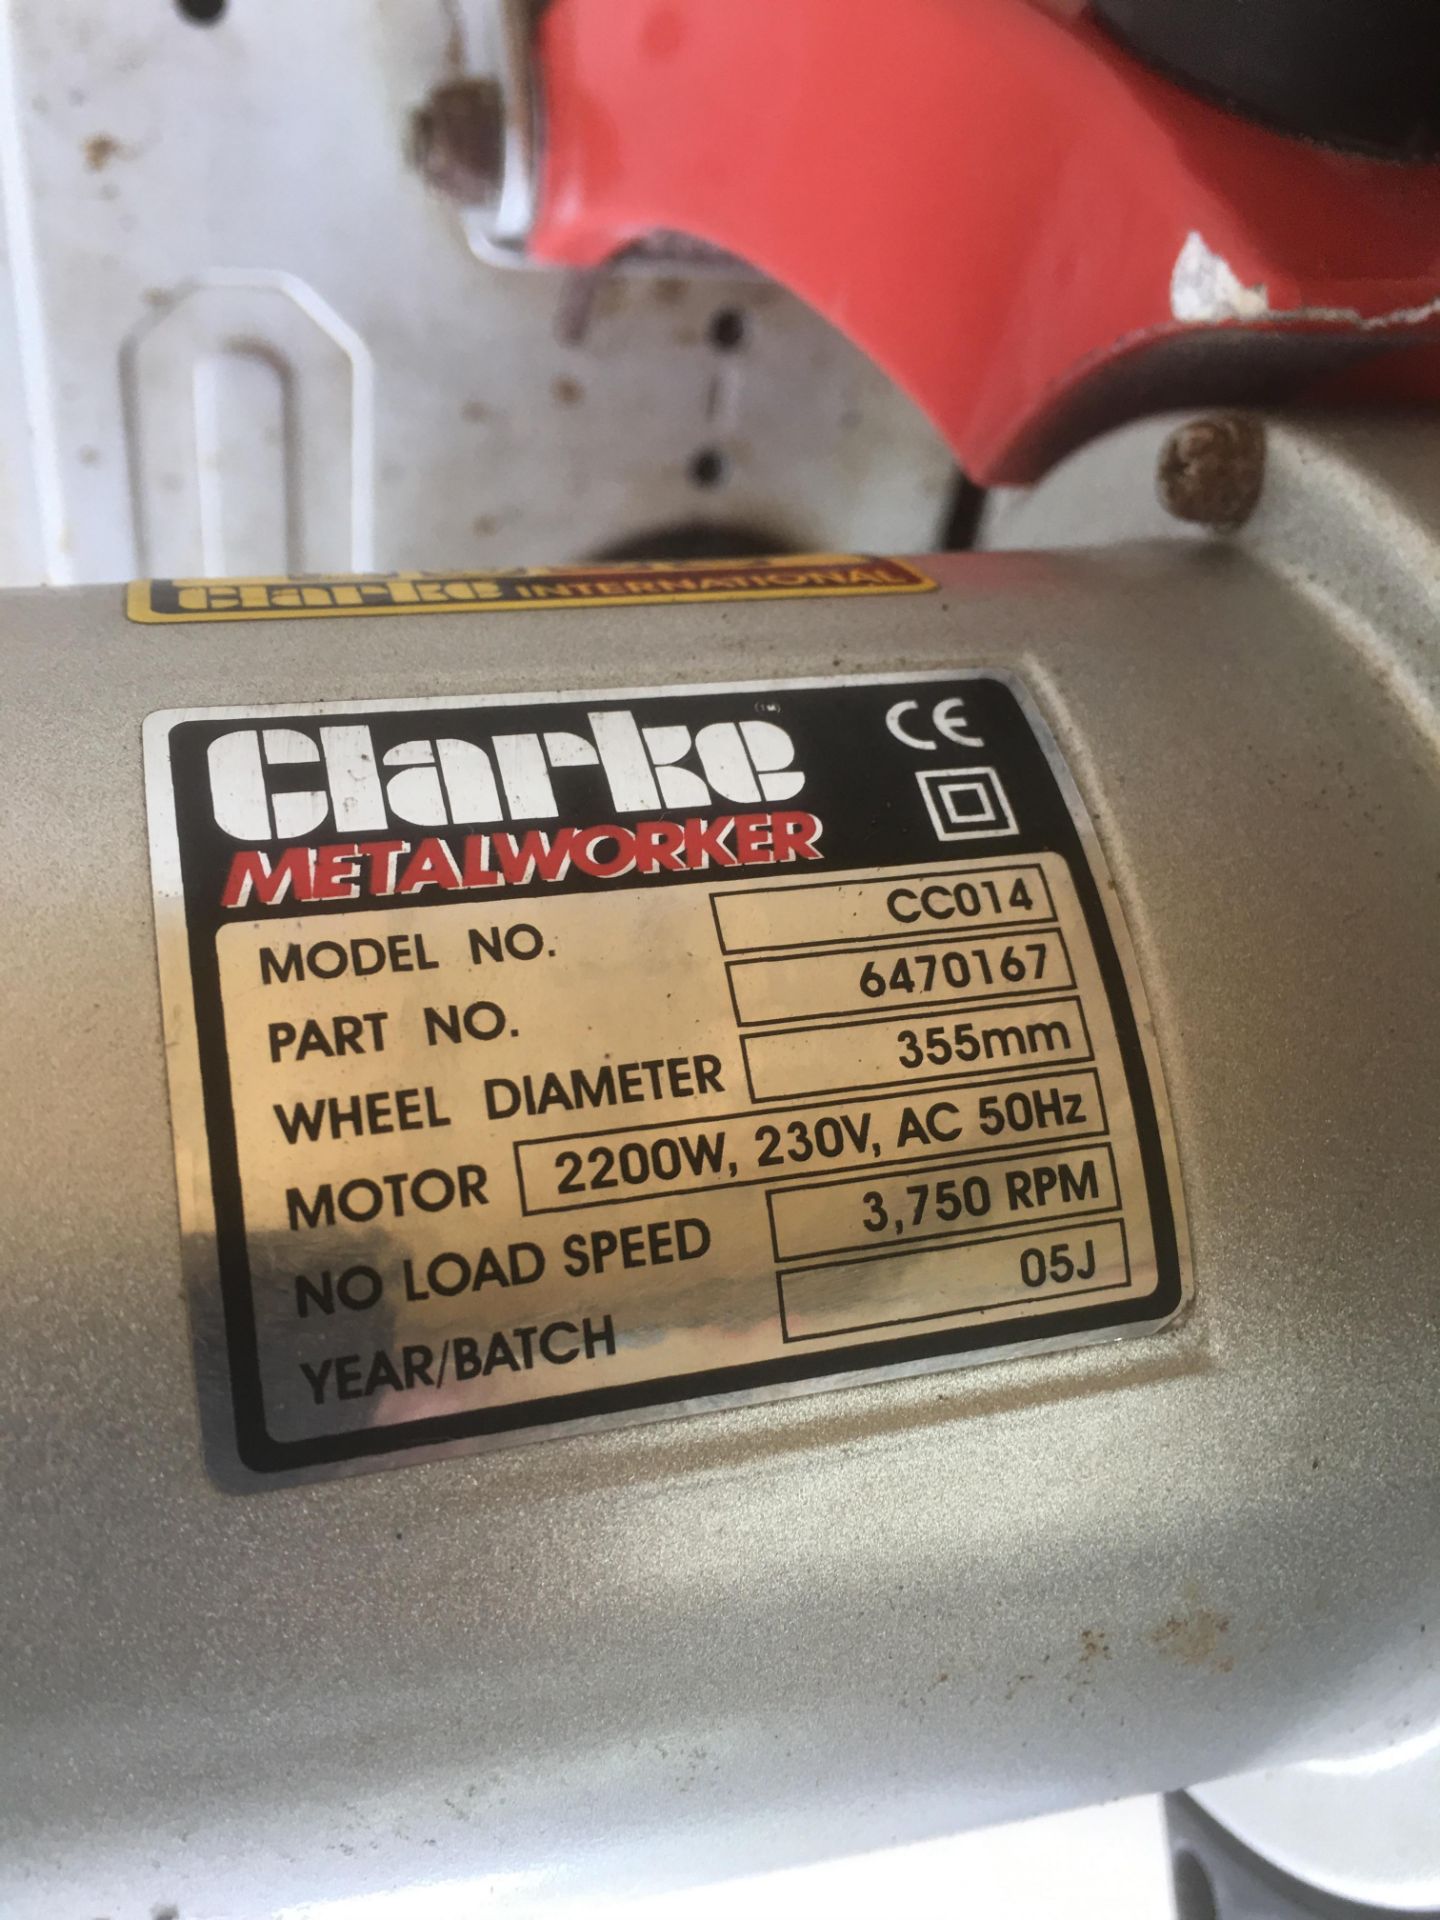 Clarke Metalworker CC014 355mm dia. Metal Chop Saw, 240V (lot located at Moorfield Drive, Altham, - Image 3 of 3